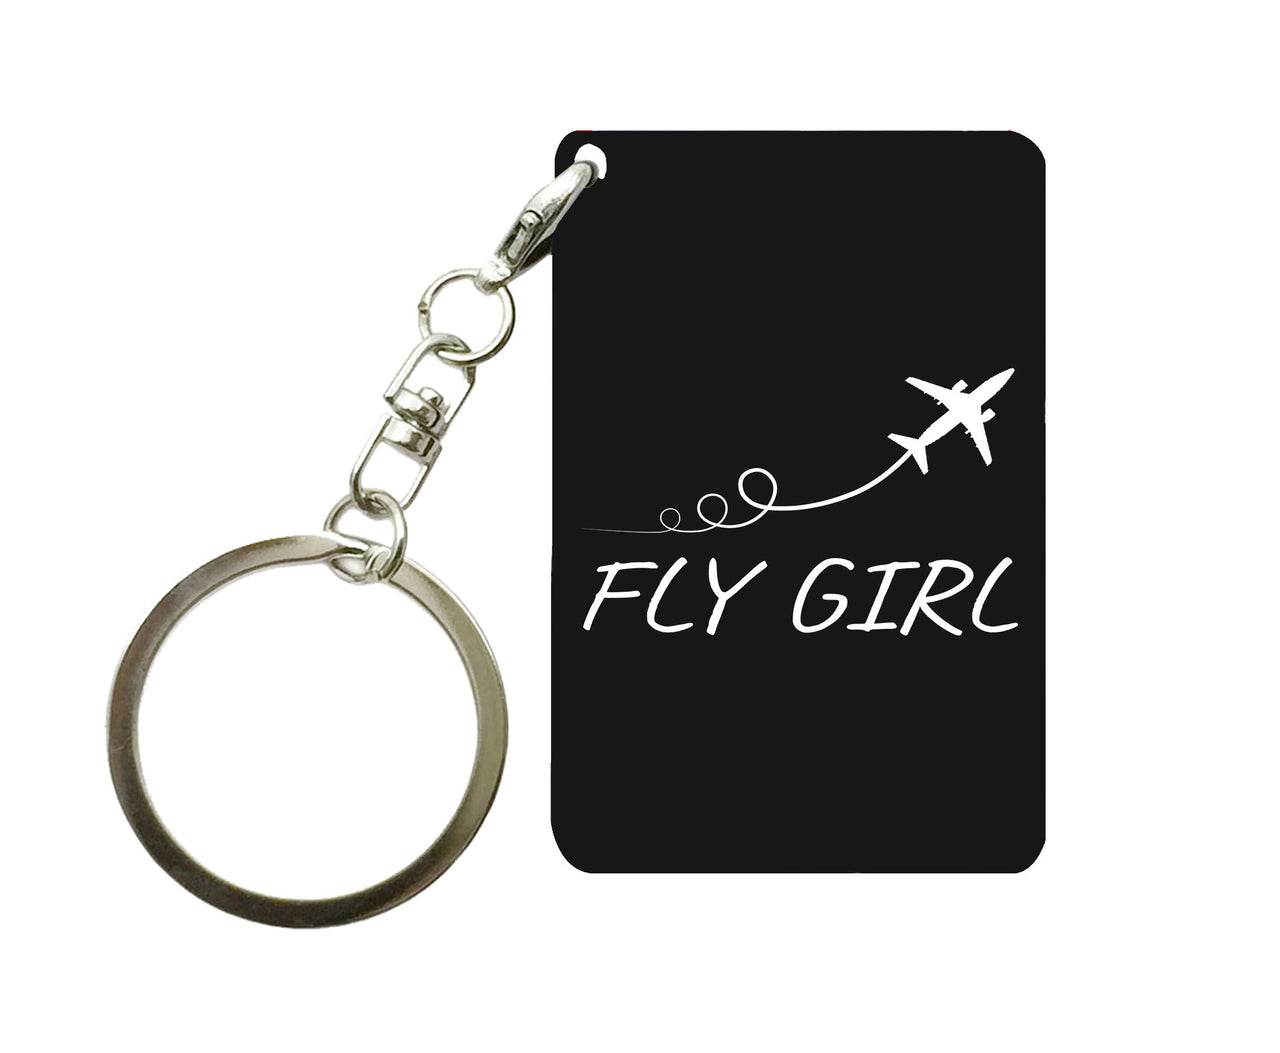 Just Fly It & Fly Girl Designed Key Chains